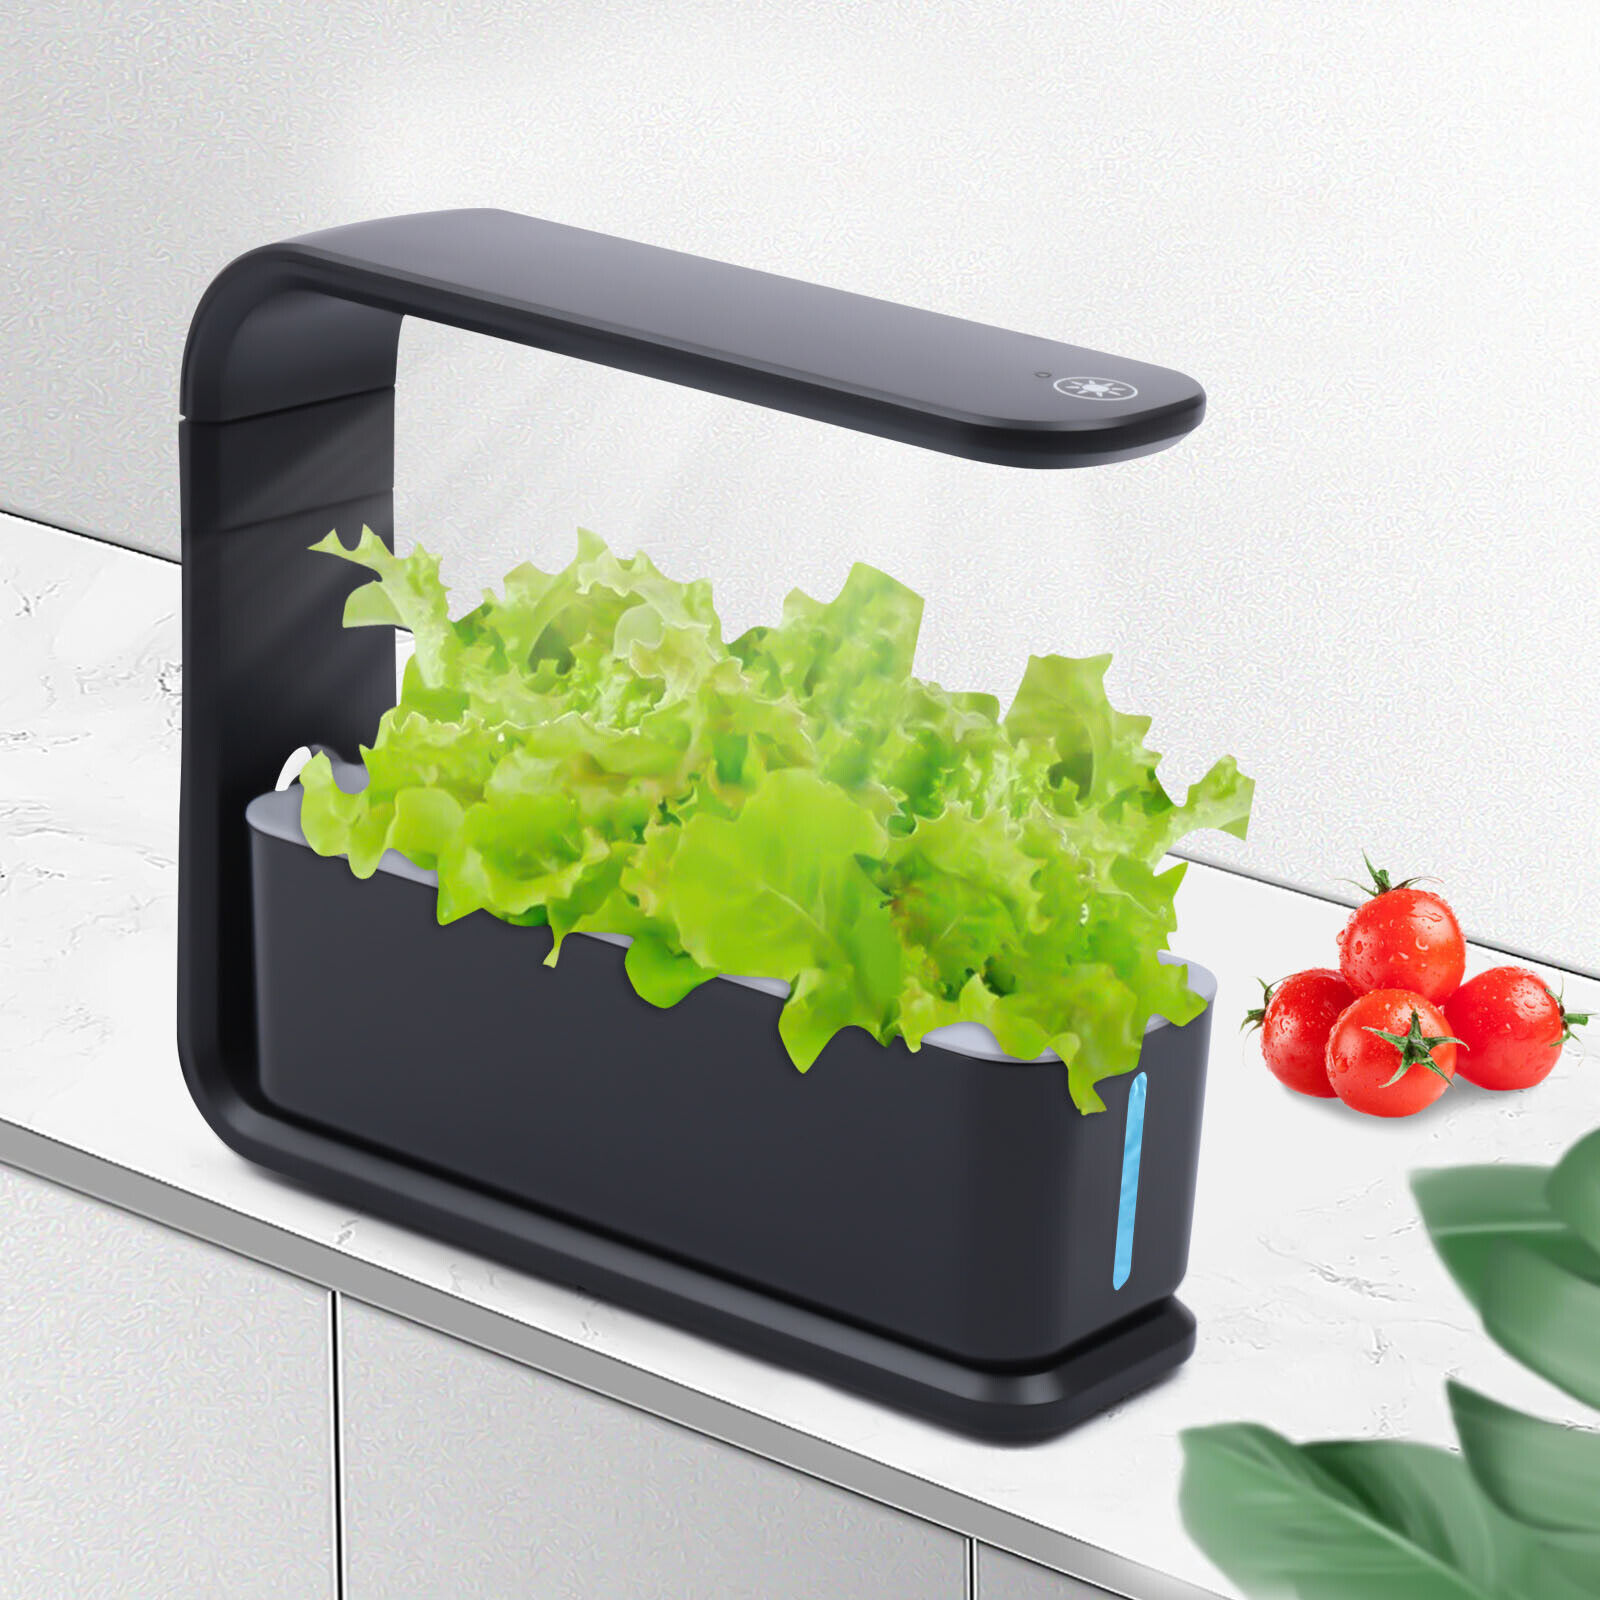 Hydroponic Growing System 3 Pods Indoor Garden Plants Fruits Growing w/60 LEDs 